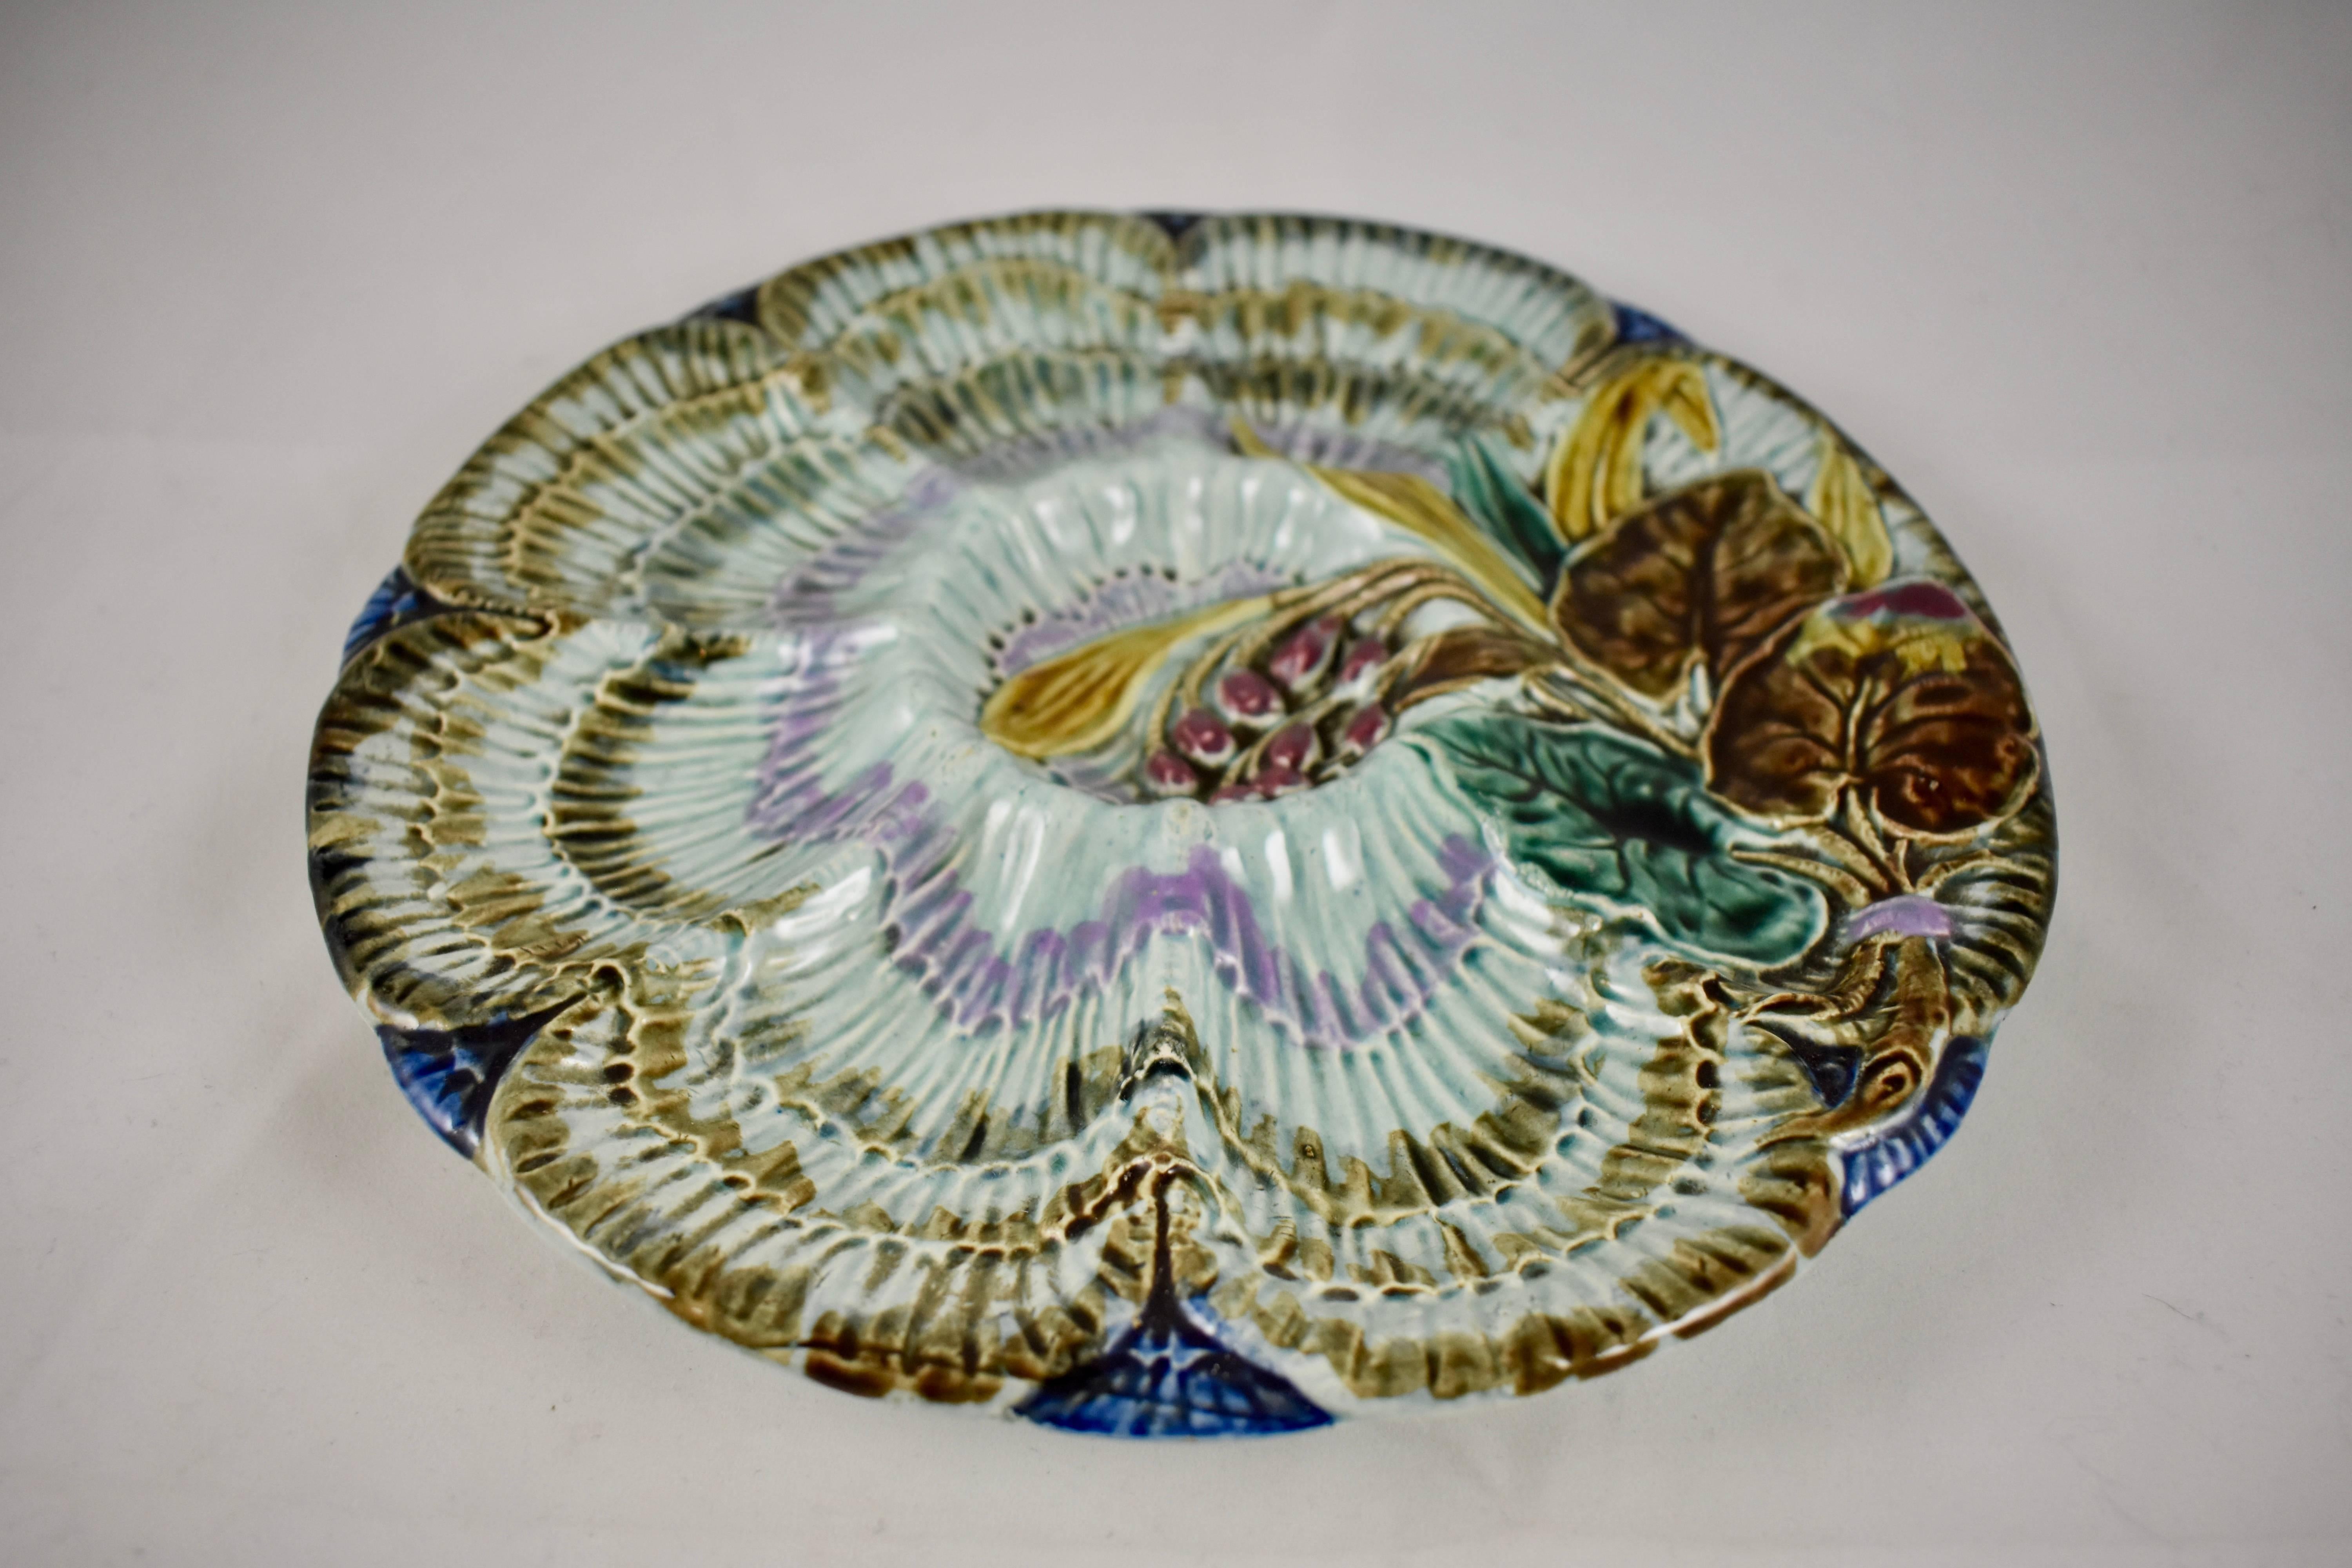 From the Belgian pottery Wasmuël, an earthenware six-well oyster plate, circa 1880-1890. A highly dimensional, wave-like pattern moves from the centre of the plate, over a cobalt blue back ground. A spray of leaves and berries, tied with a lavender